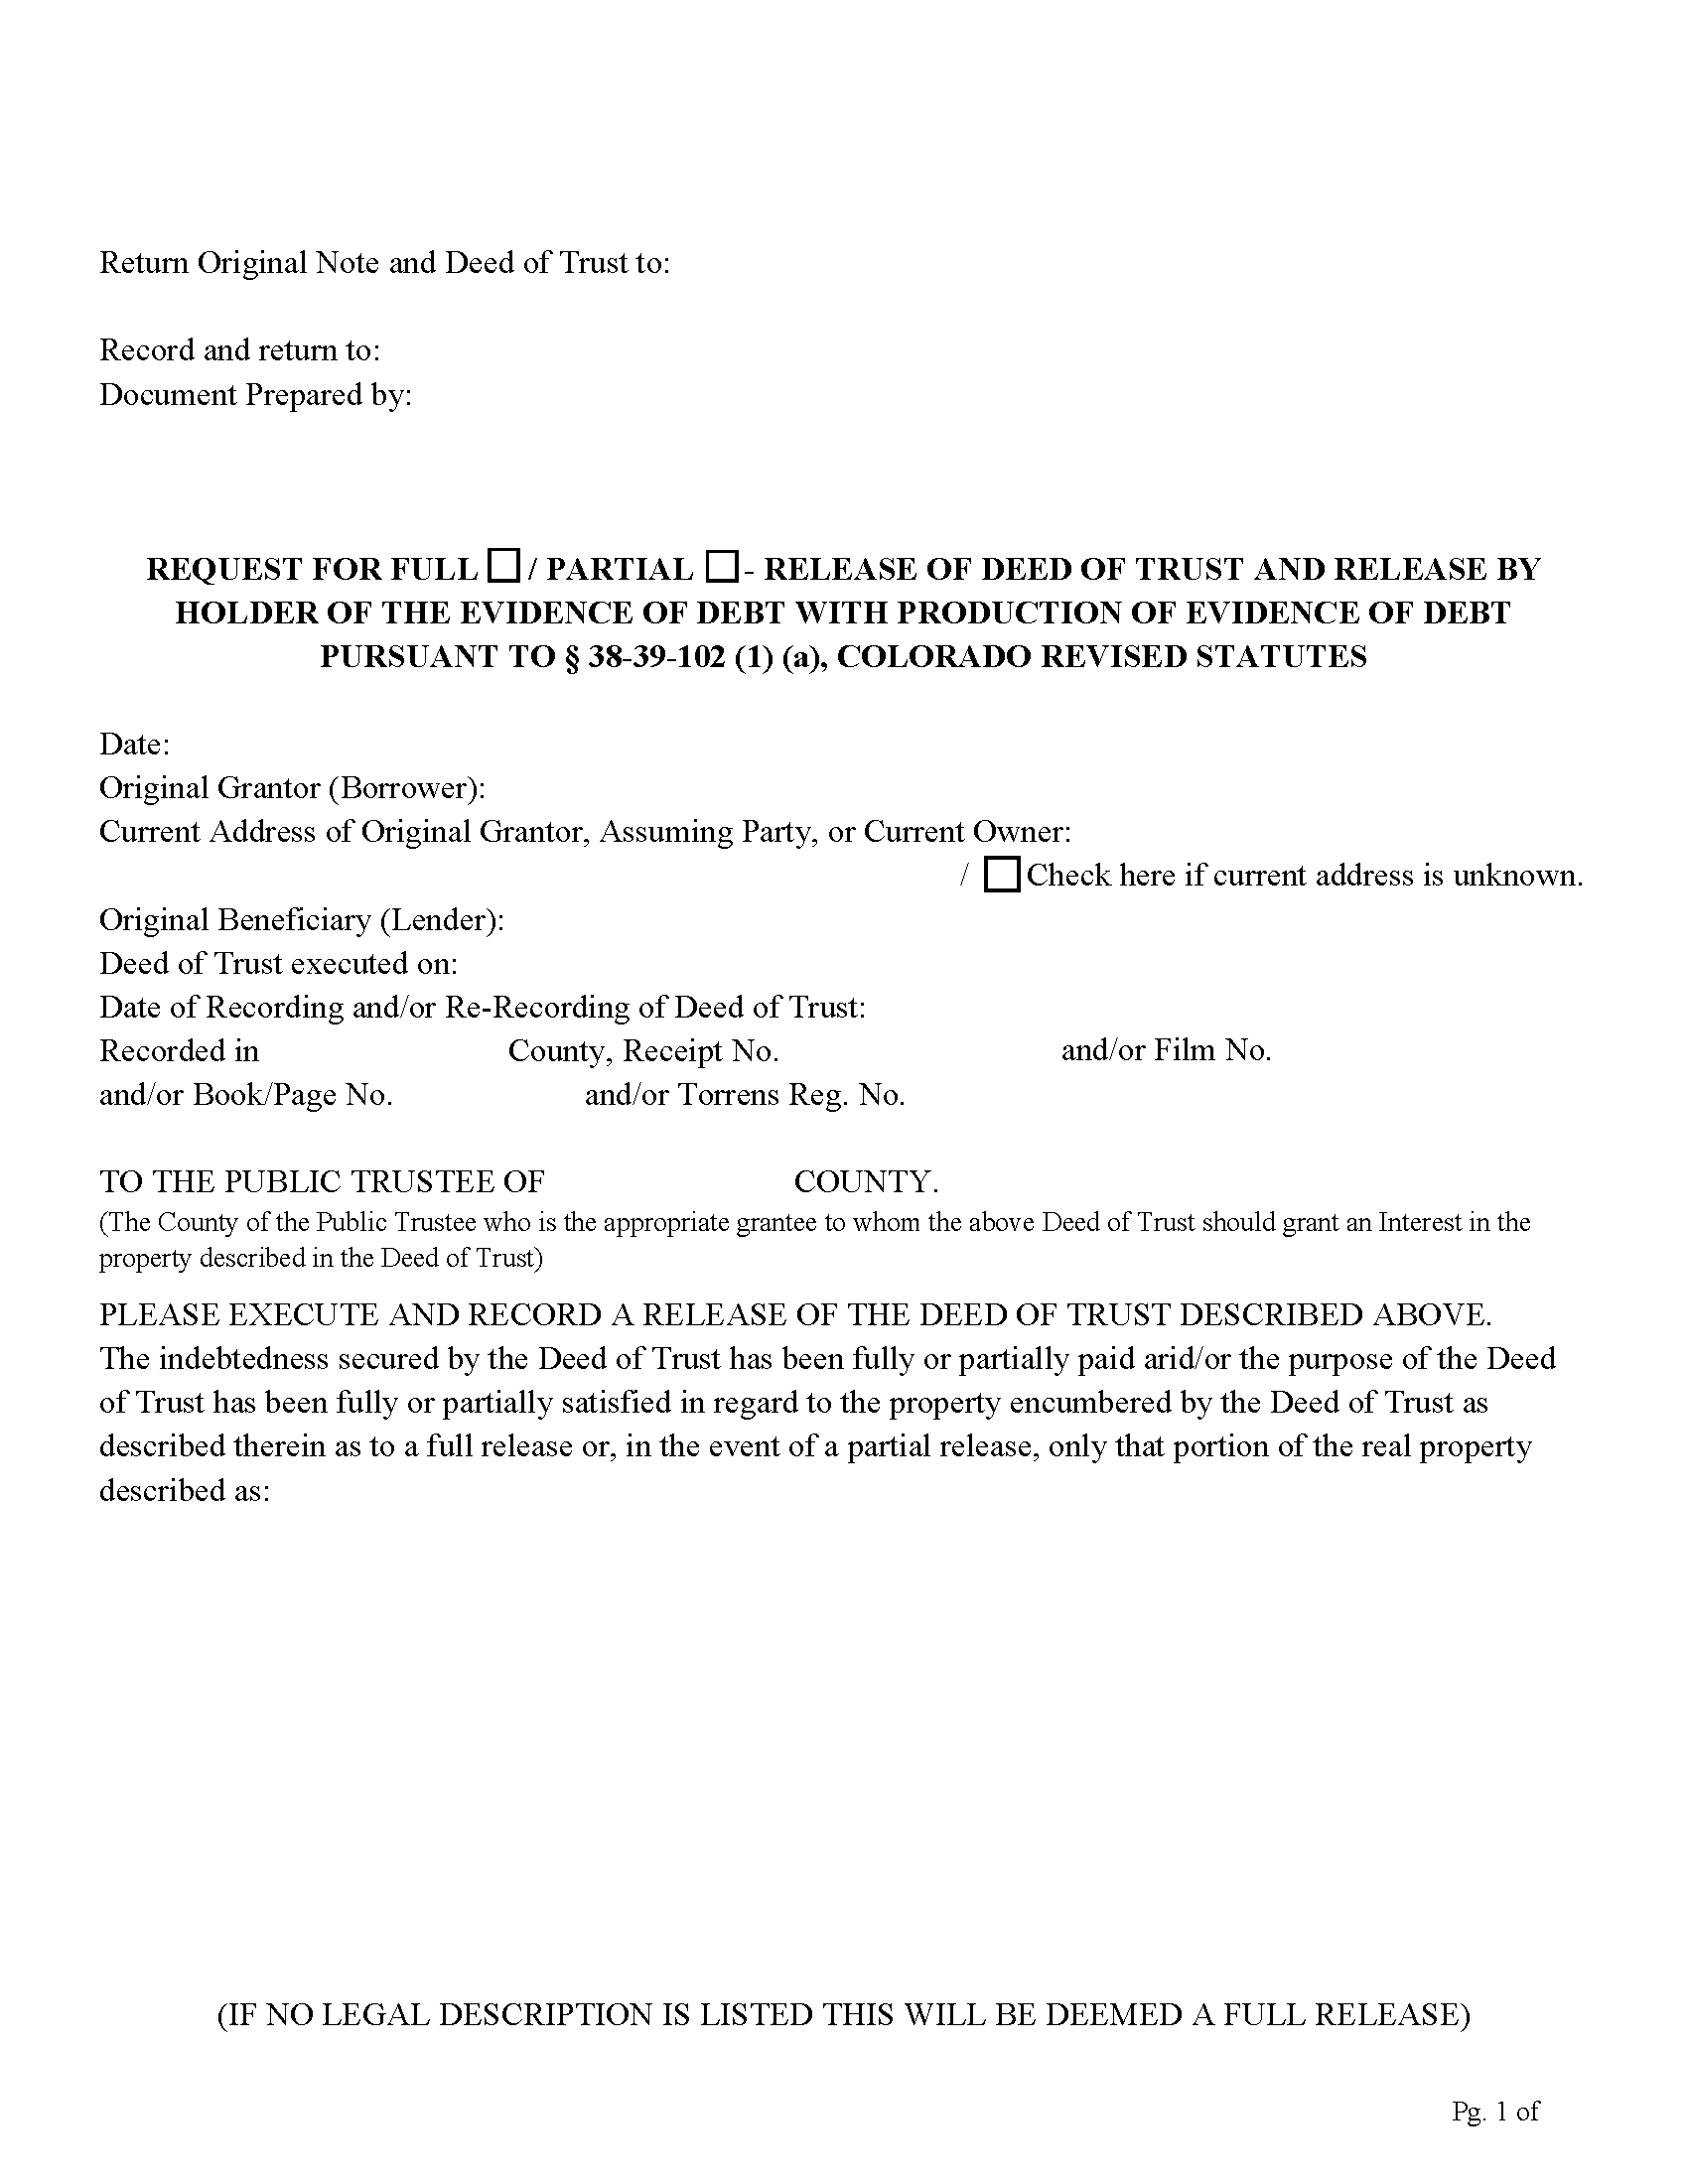 Colorado Release of Deed of Trust WITH Production of Evidence Image